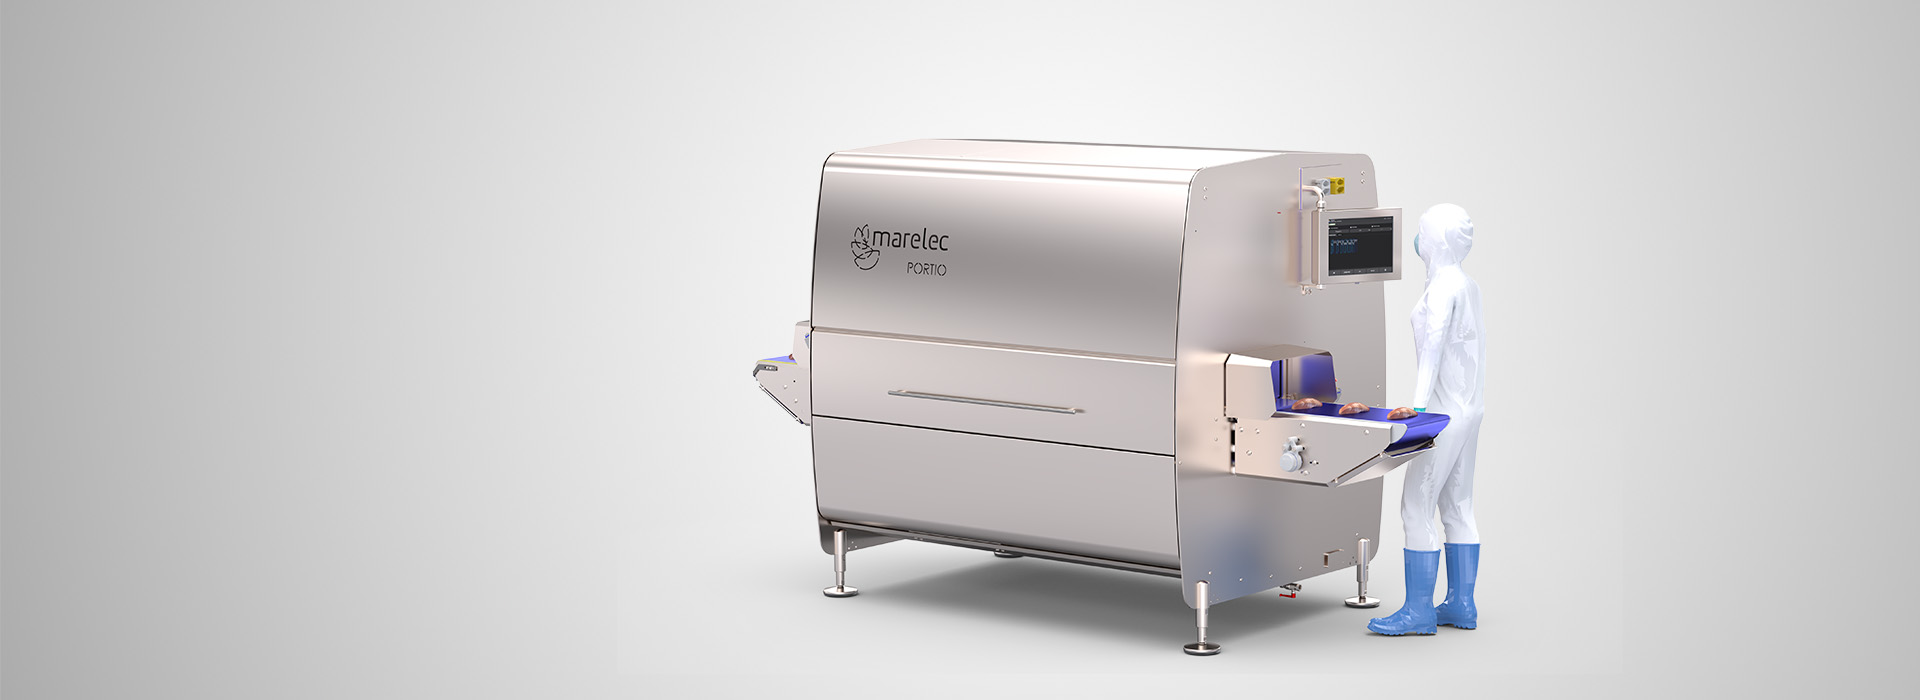 The PORTIO Plus is the most versatile machine for poultry, red meat or fish.